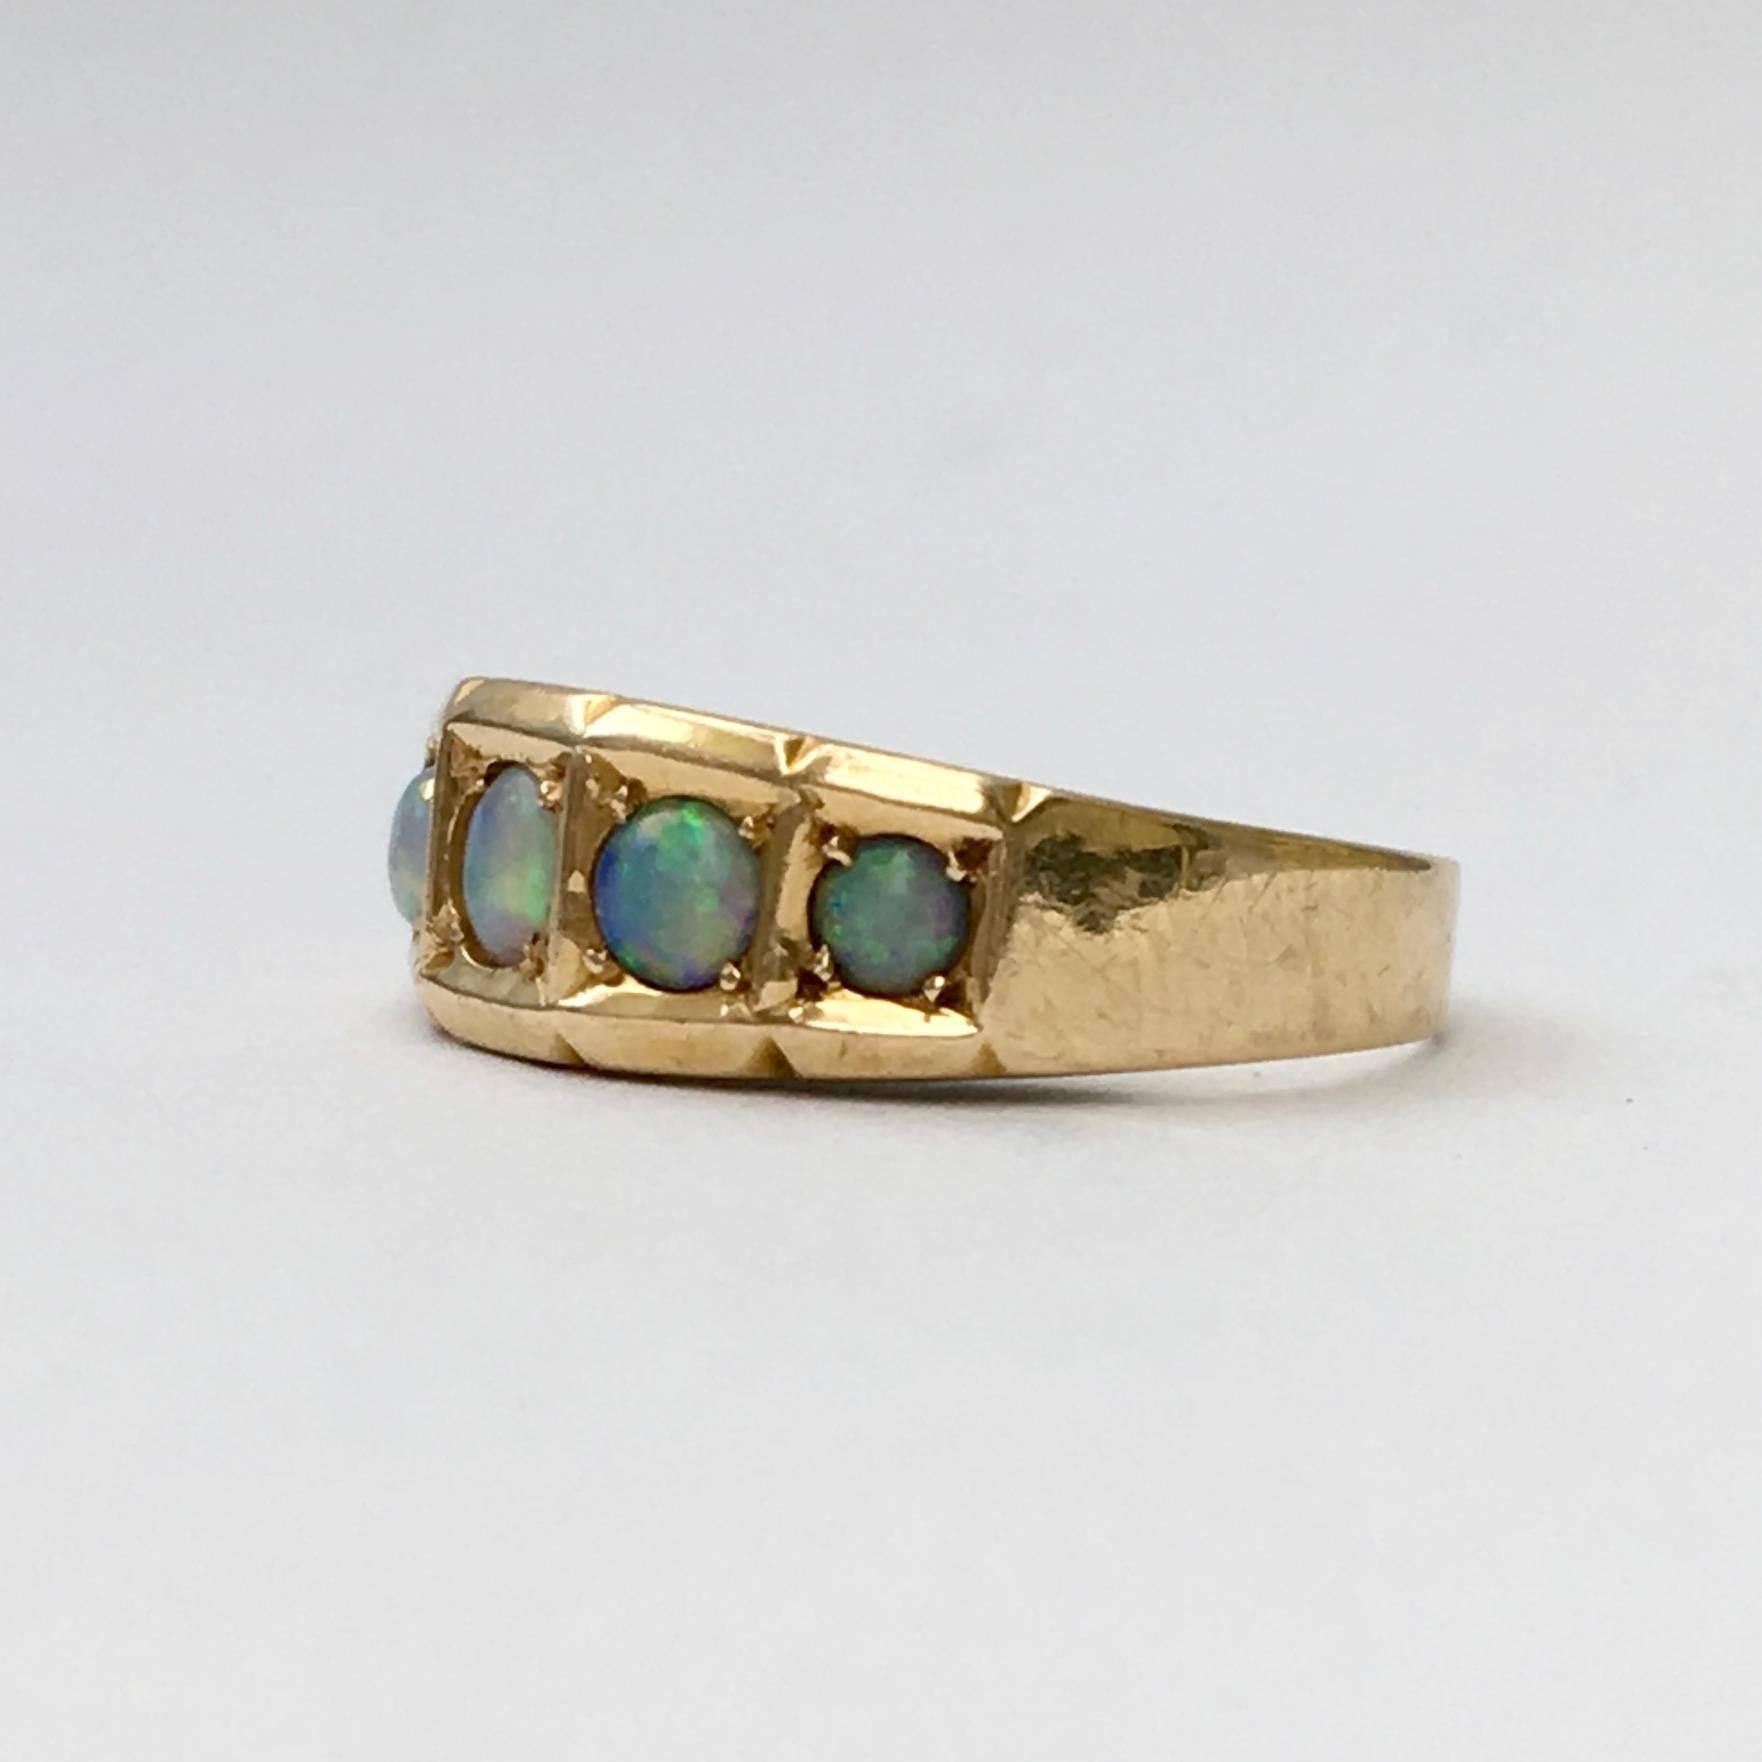 The name opal comes from the Greek opallios, which means to see a change of colour, and reflects the iridescent glow of the stone. Opals have been used in jewellery for centuries and can vary greatly in appearance. The opals of this late Victorian